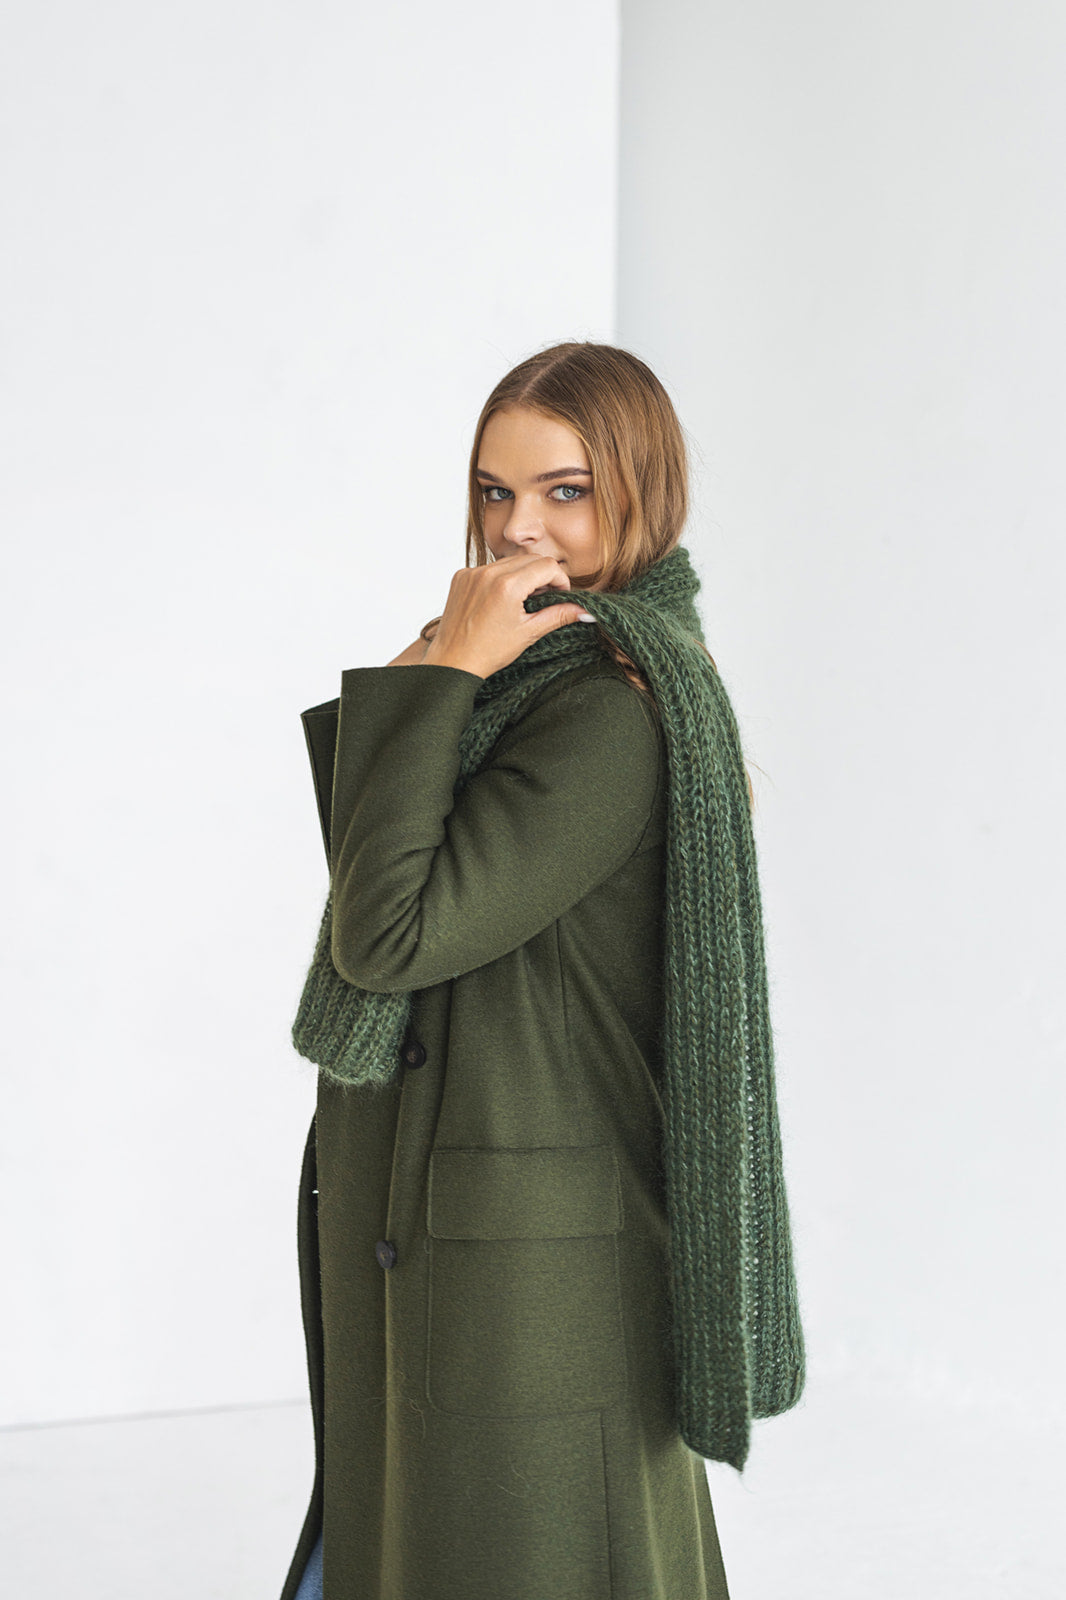 Green cable knit mohair scarf, long hooded oversized alpaca wool scarf, fuzzy infinity women's scarves, fluffy winter knitted shawl, blanket